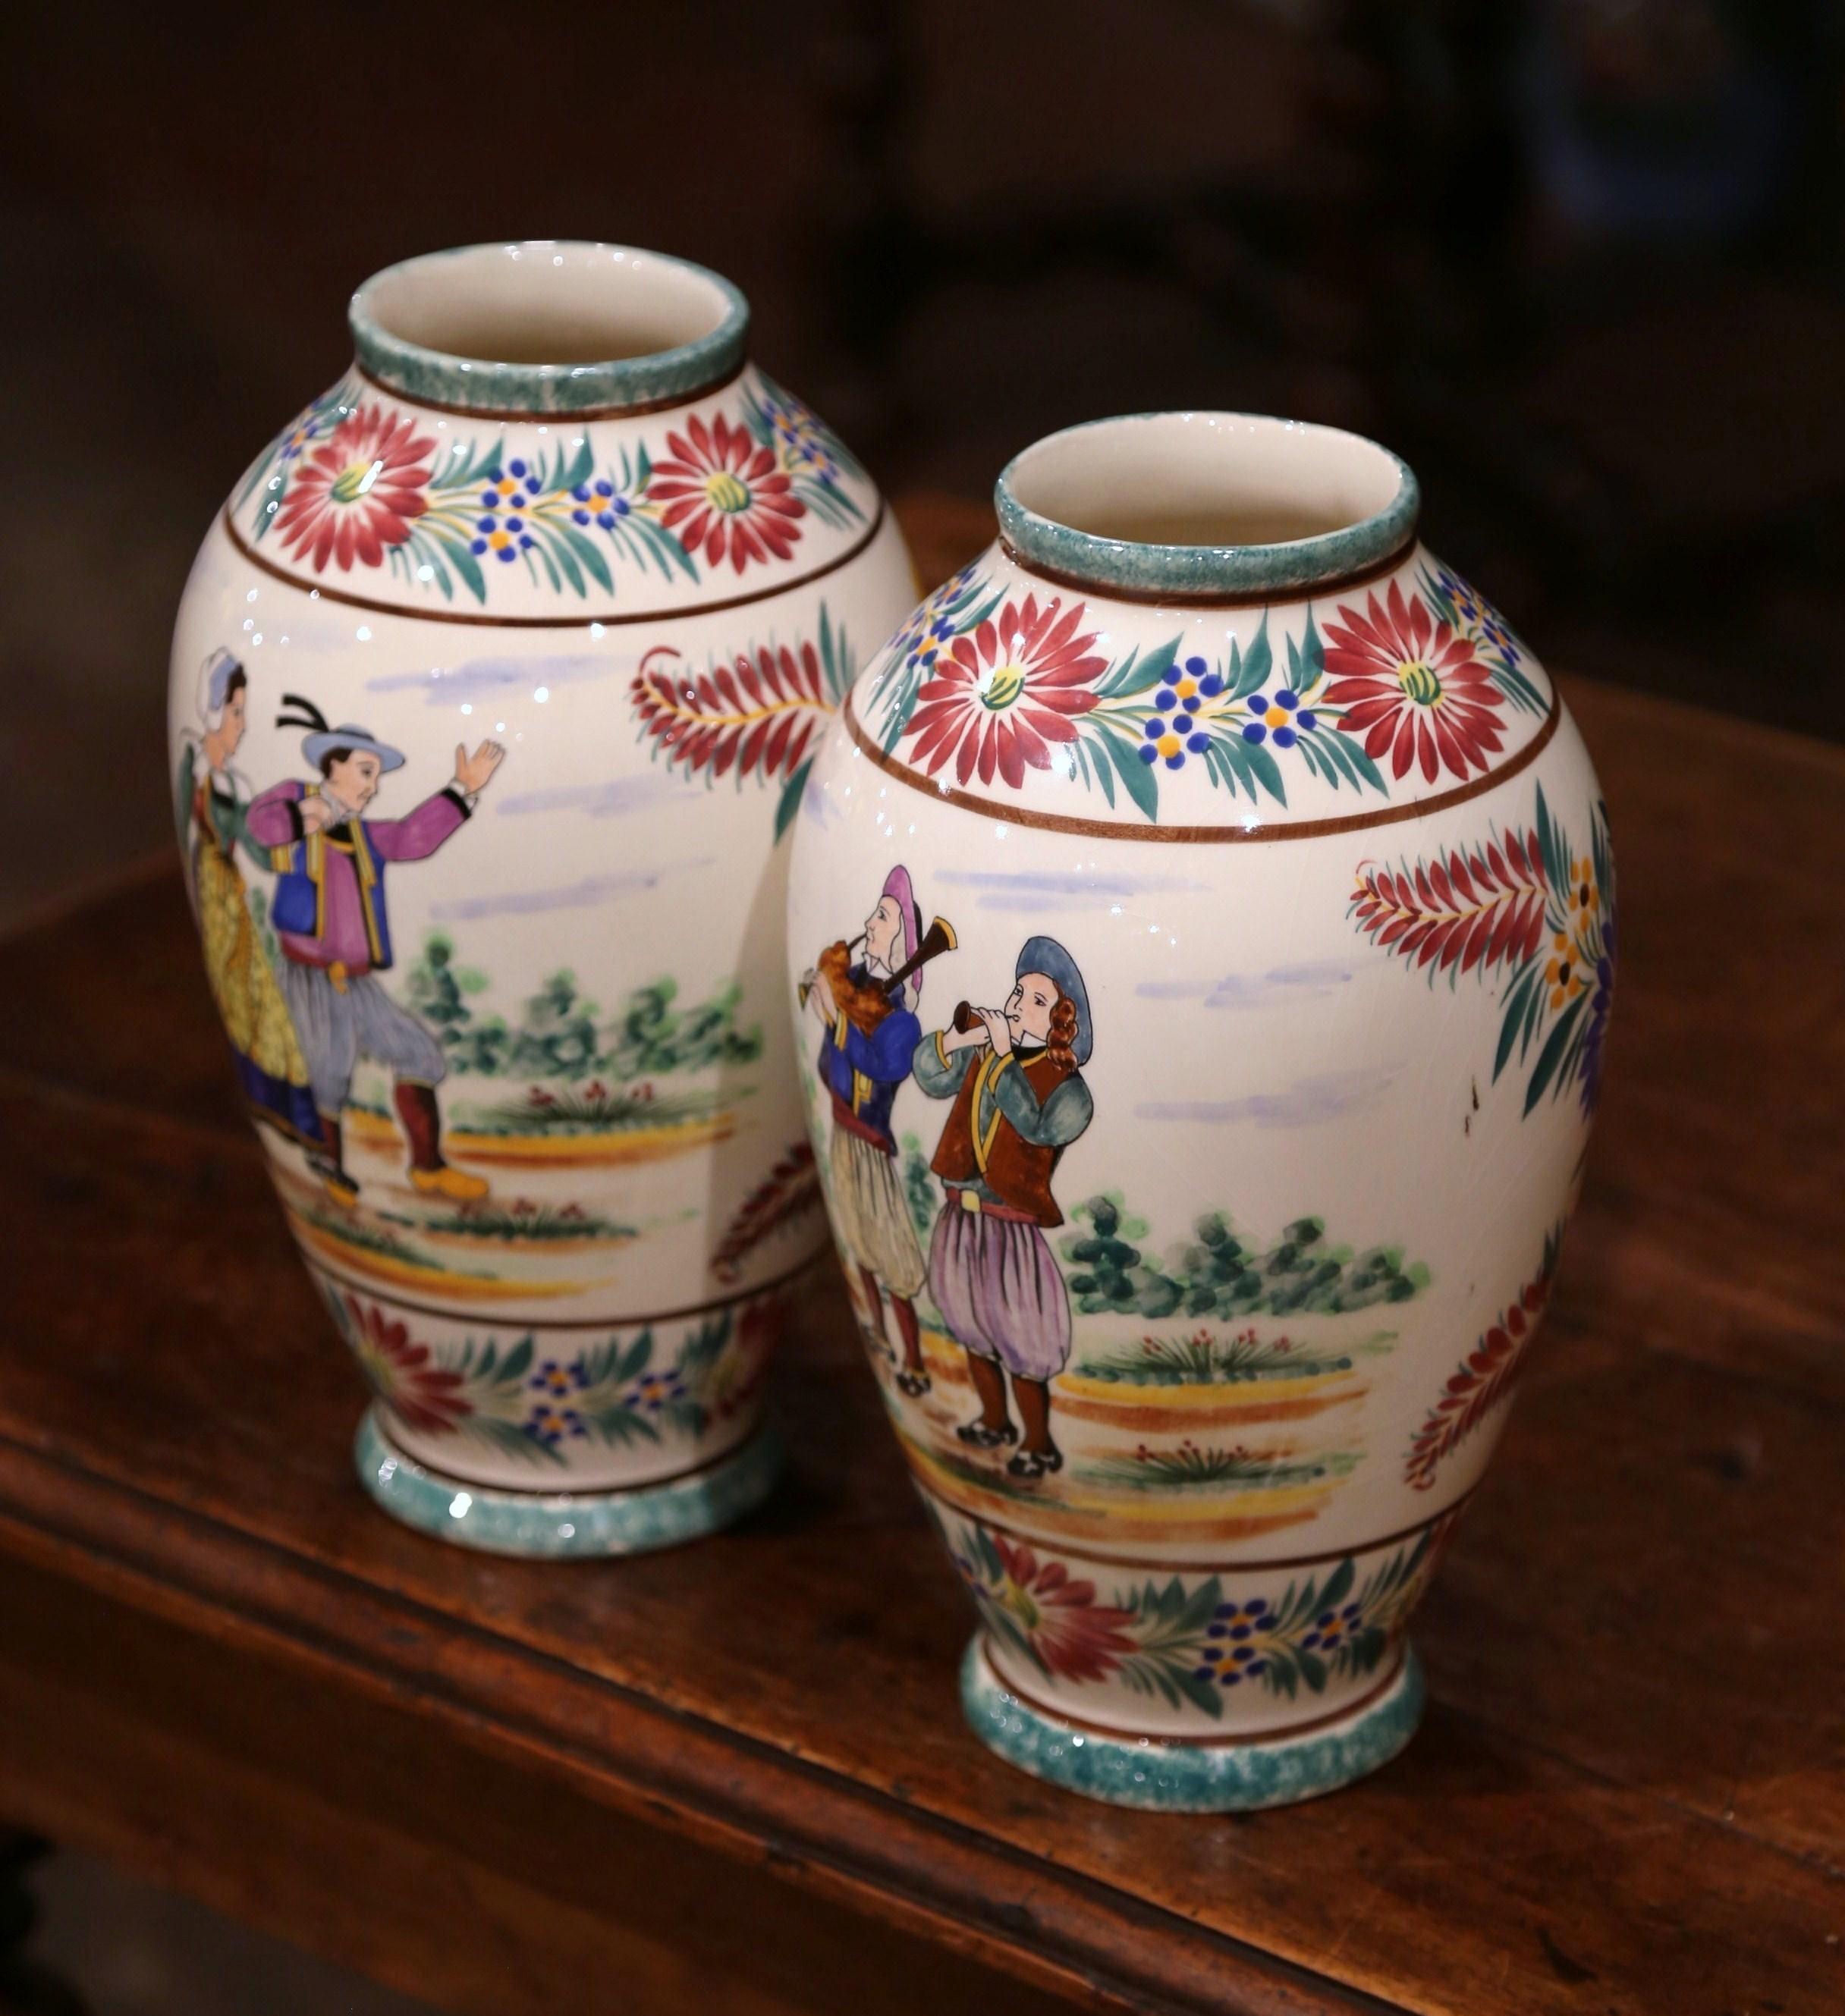 Decorate a mantel or table with this colorful pair of antique faience vessels. Crafted in Brittany, France, circa 1930, both hand painted vases are round in shape, and depict Britons people dressed in traditional outfits. One vase features a couple